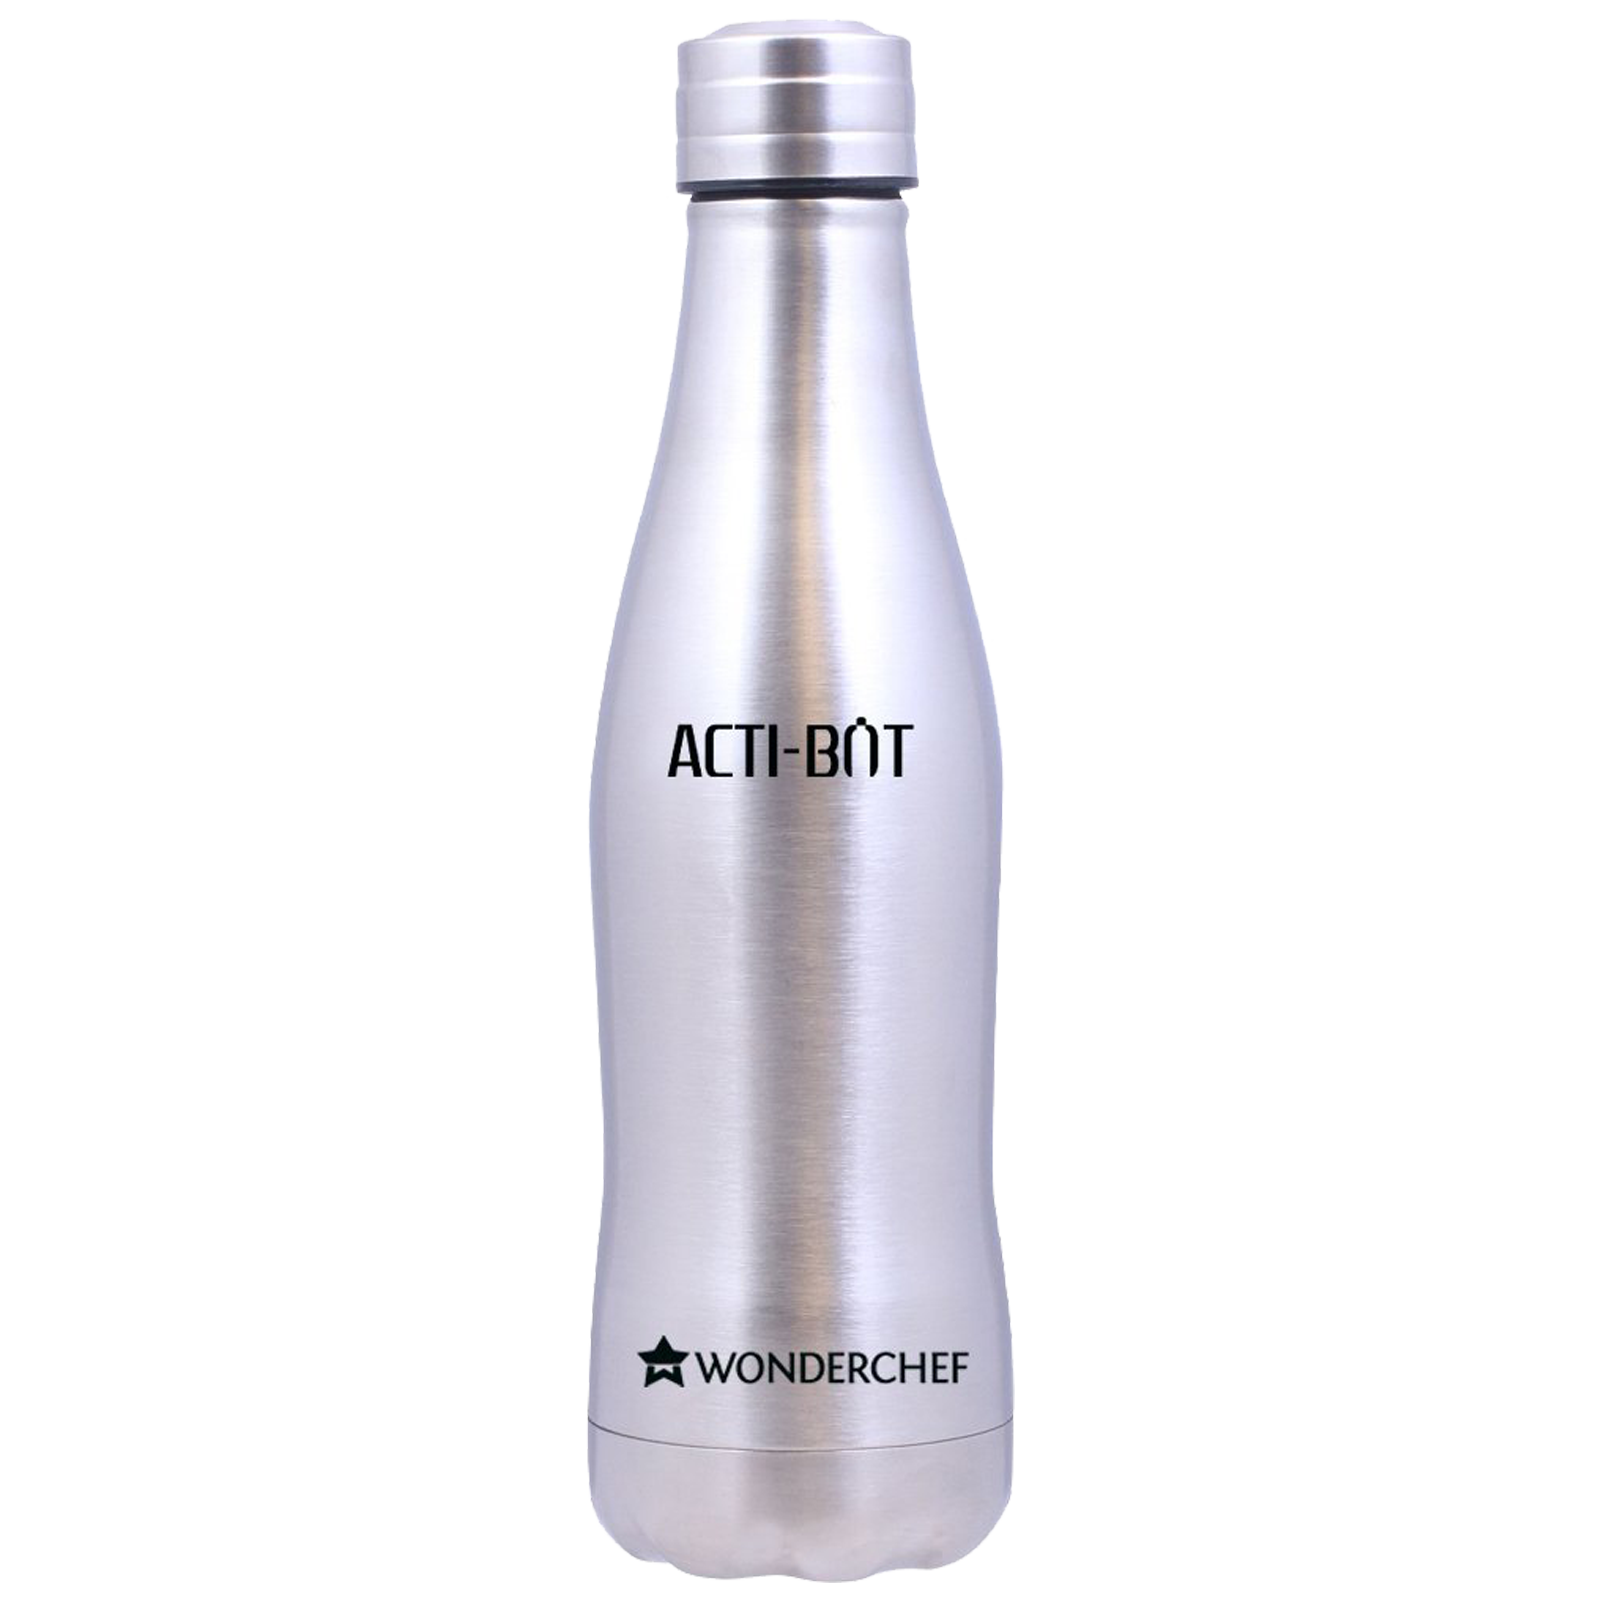 Wonderchef Acti-Bot 0.65 Litres Stainless Steel Water Bottle (Spill and Leak Proof, 63153146, Silver)_1